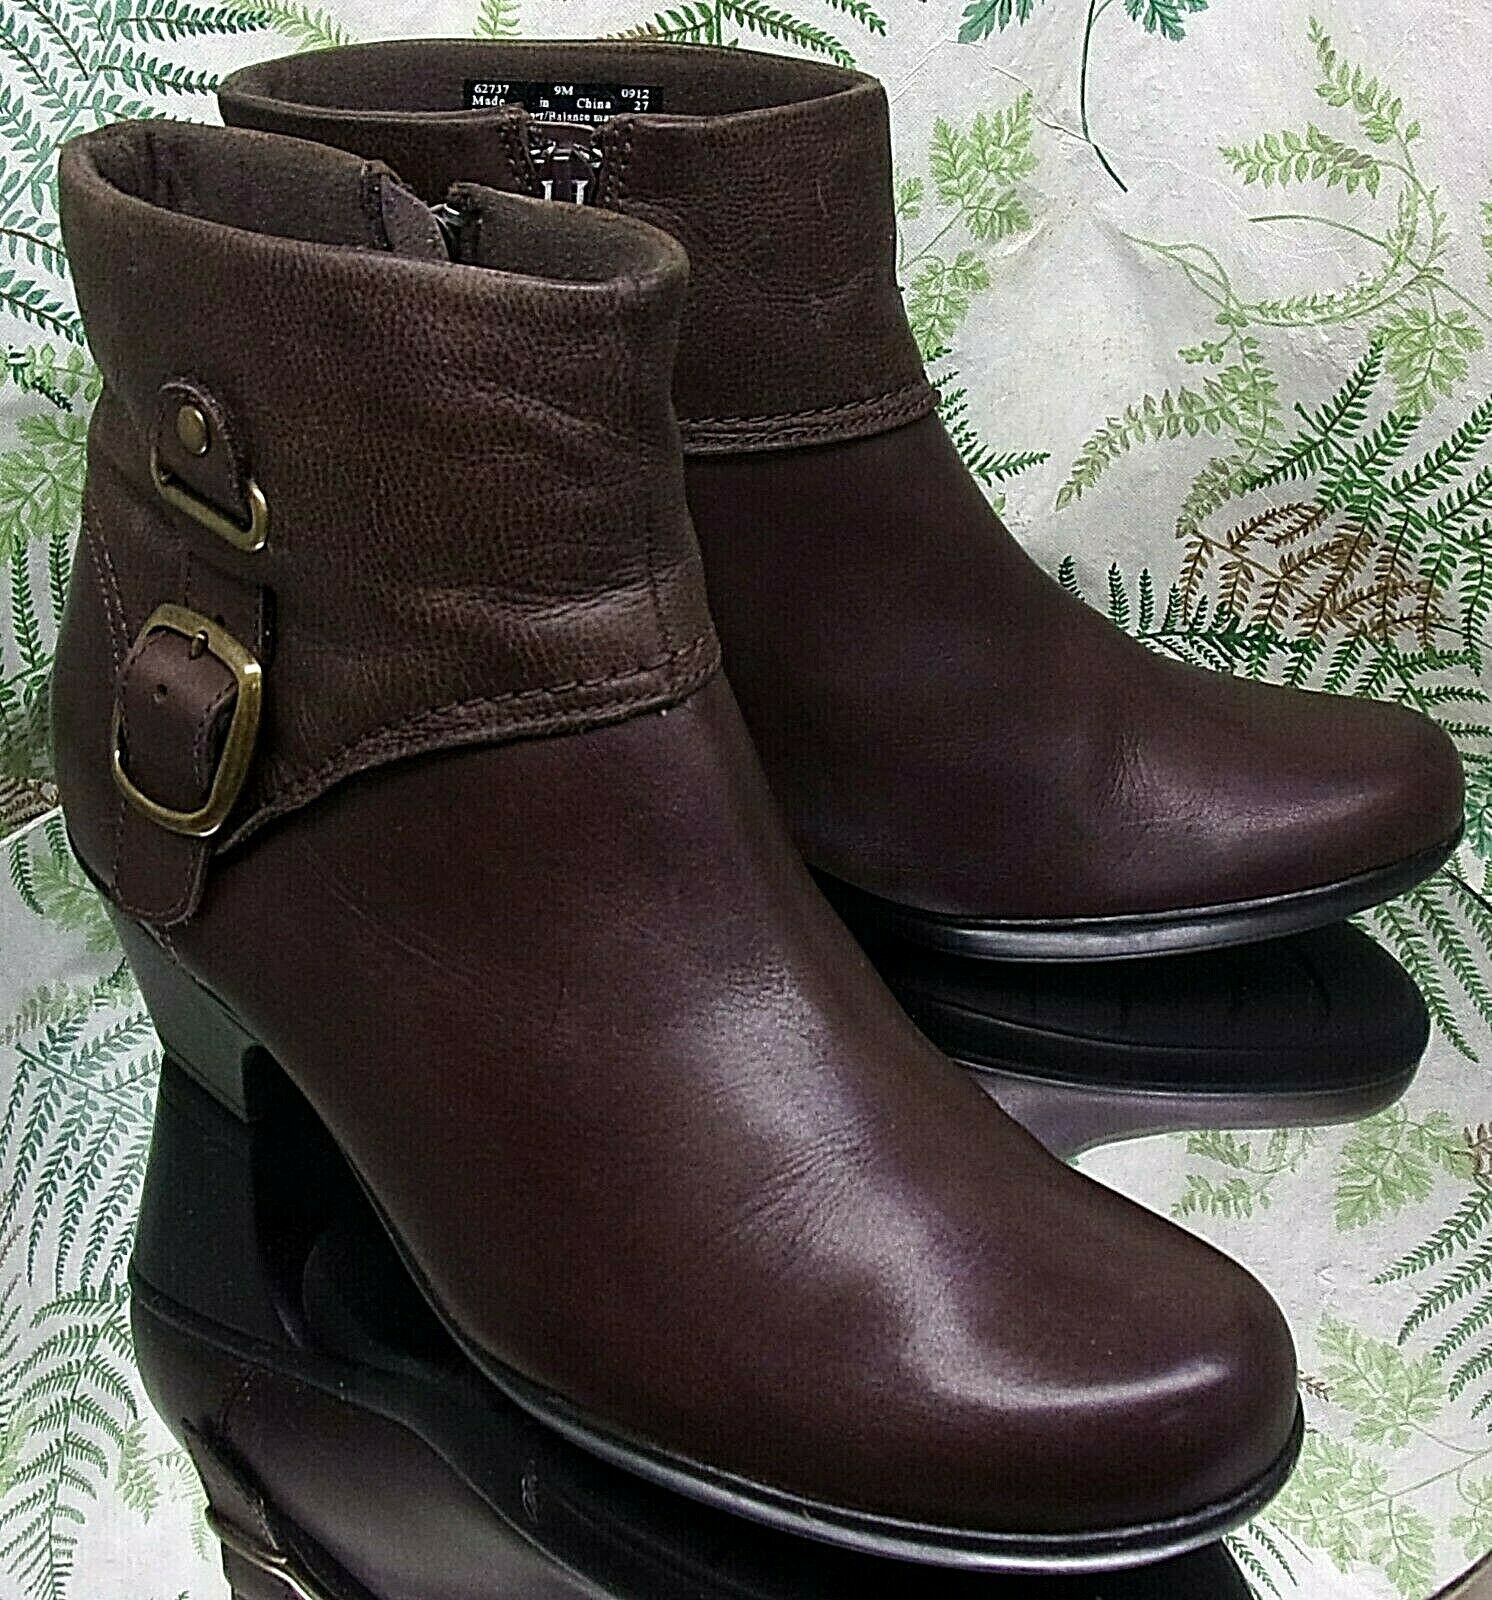 CLARKS BROWN LEATHER FASHION DRESS ANKLE BOOTS SHOES HEELS US WOMENS SZ 9 M